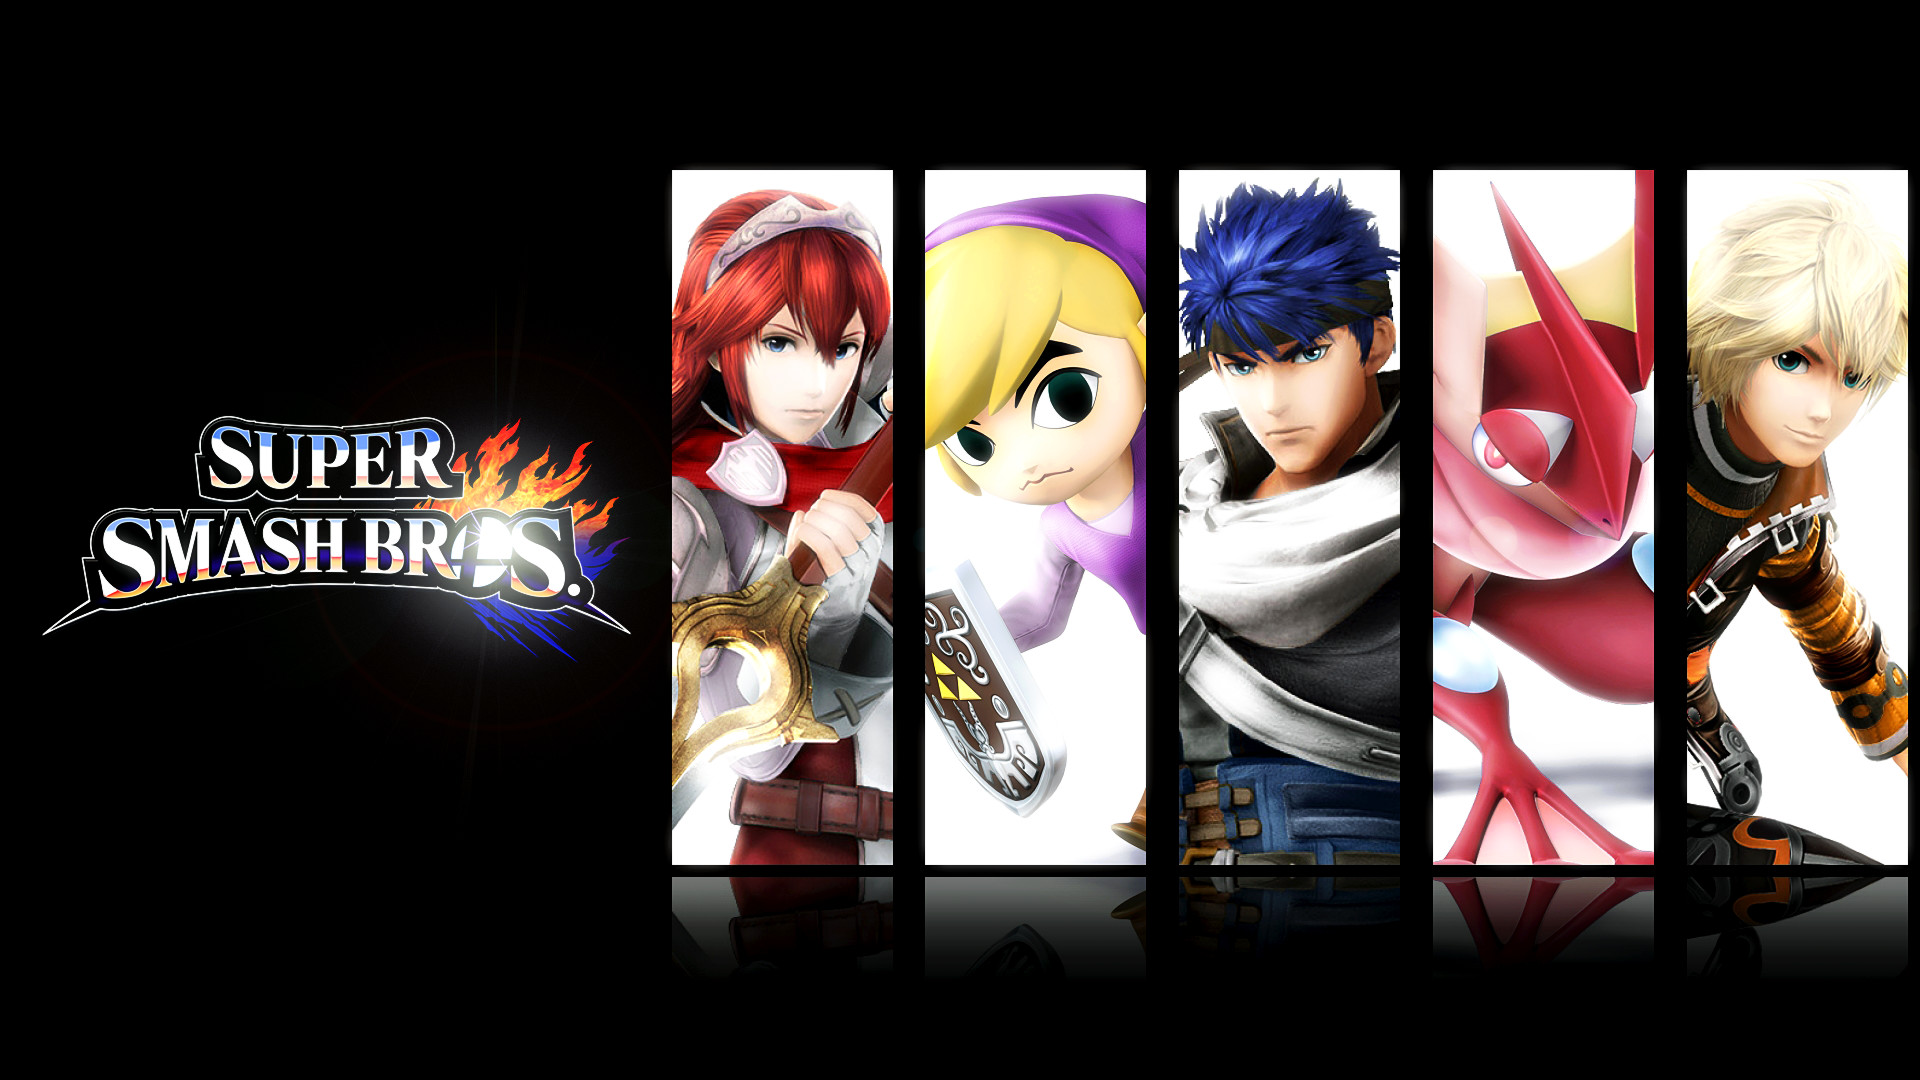 1920x1080 ... Glench Super Smash Bros. 4 3DS and Wii U Mains Wallpaper by Glench